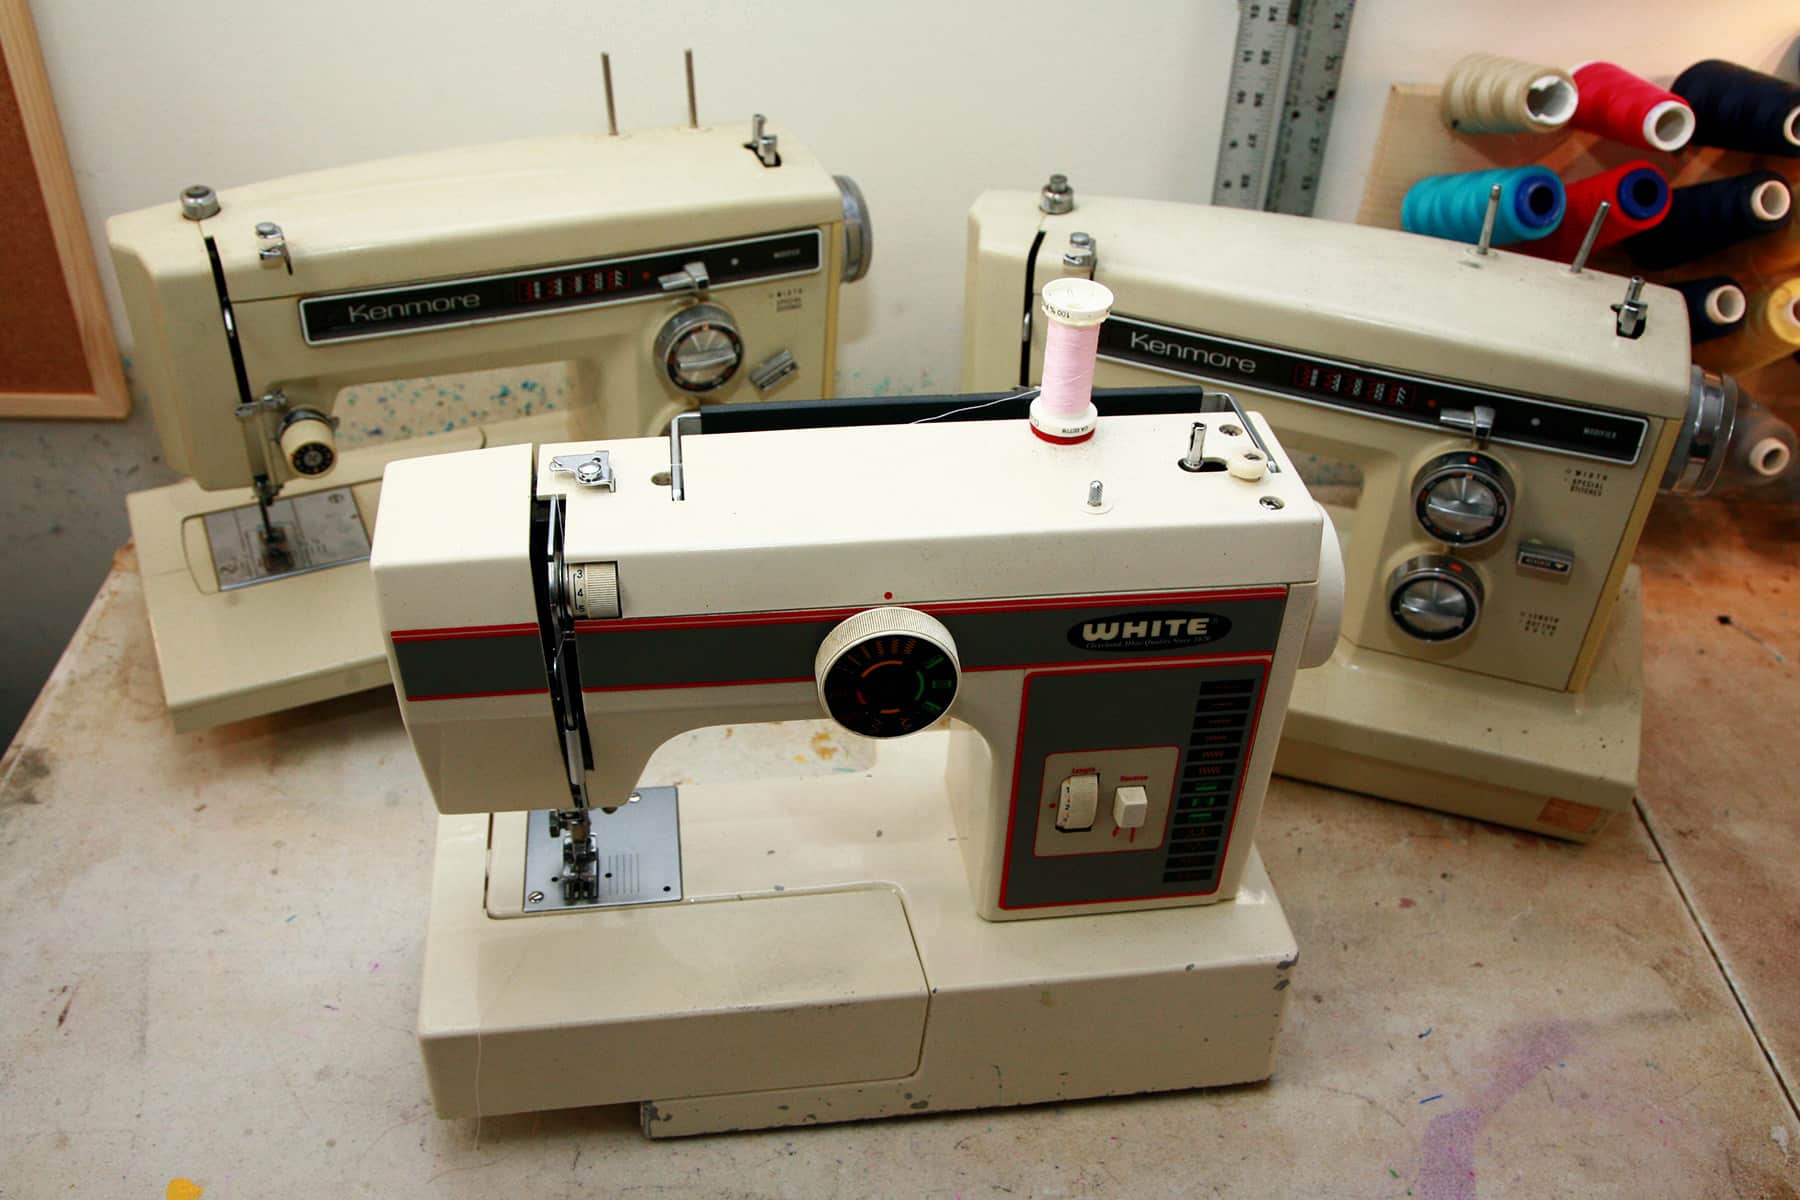 Three older model sewing machines arranged on a work table.